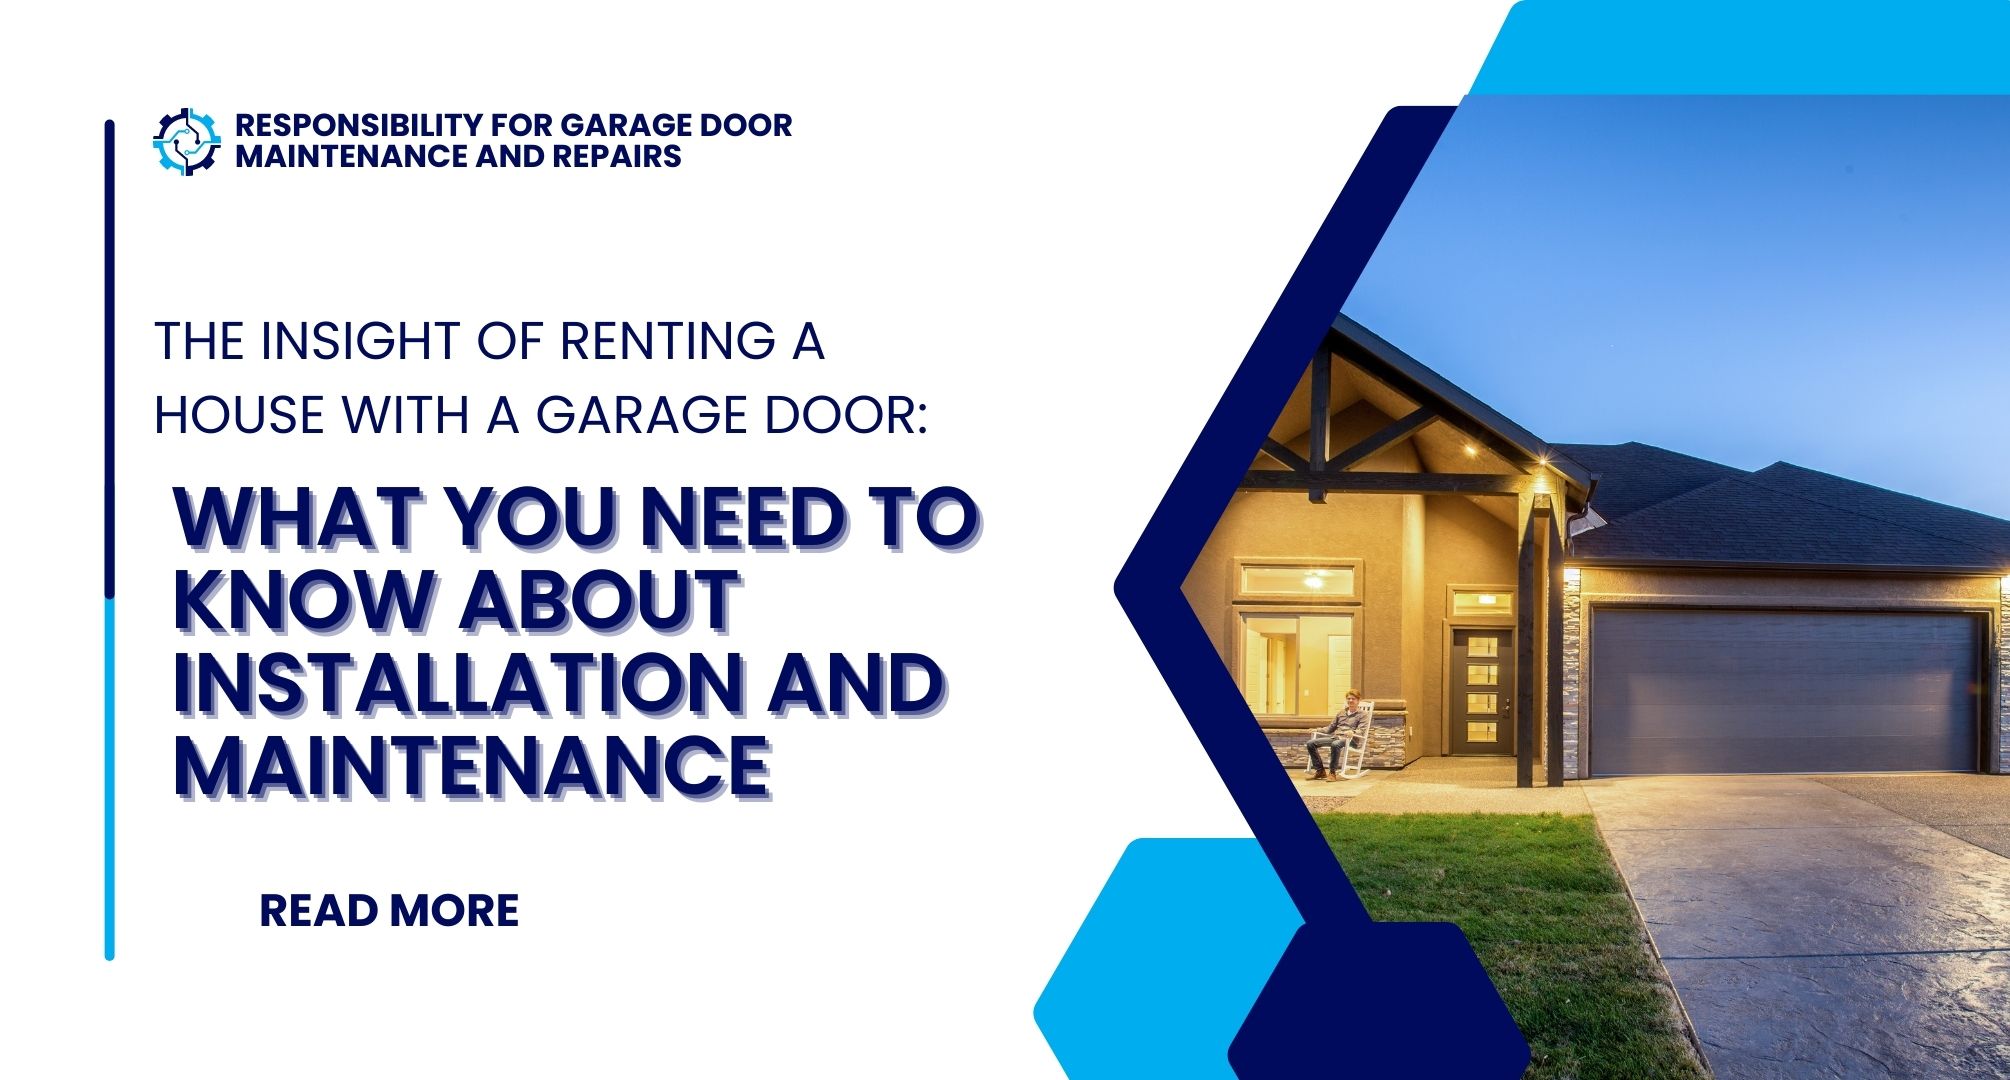 The Insight of Renting a House with a Garage Door: What You Need to Know About Installation and Maintenance